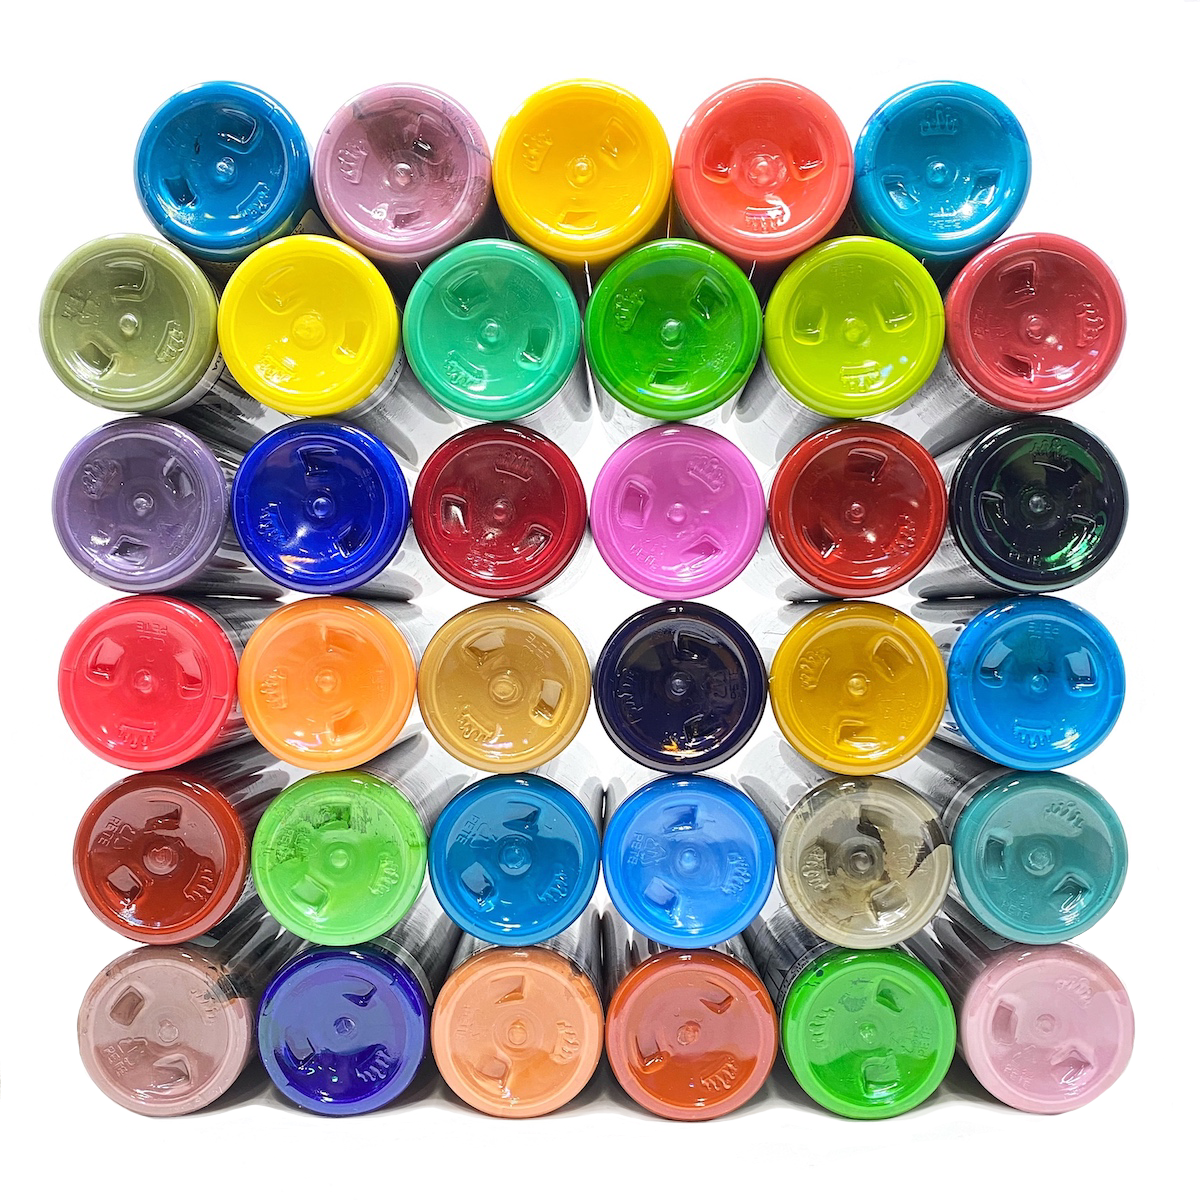 30% OFF from these 4 oz colors.